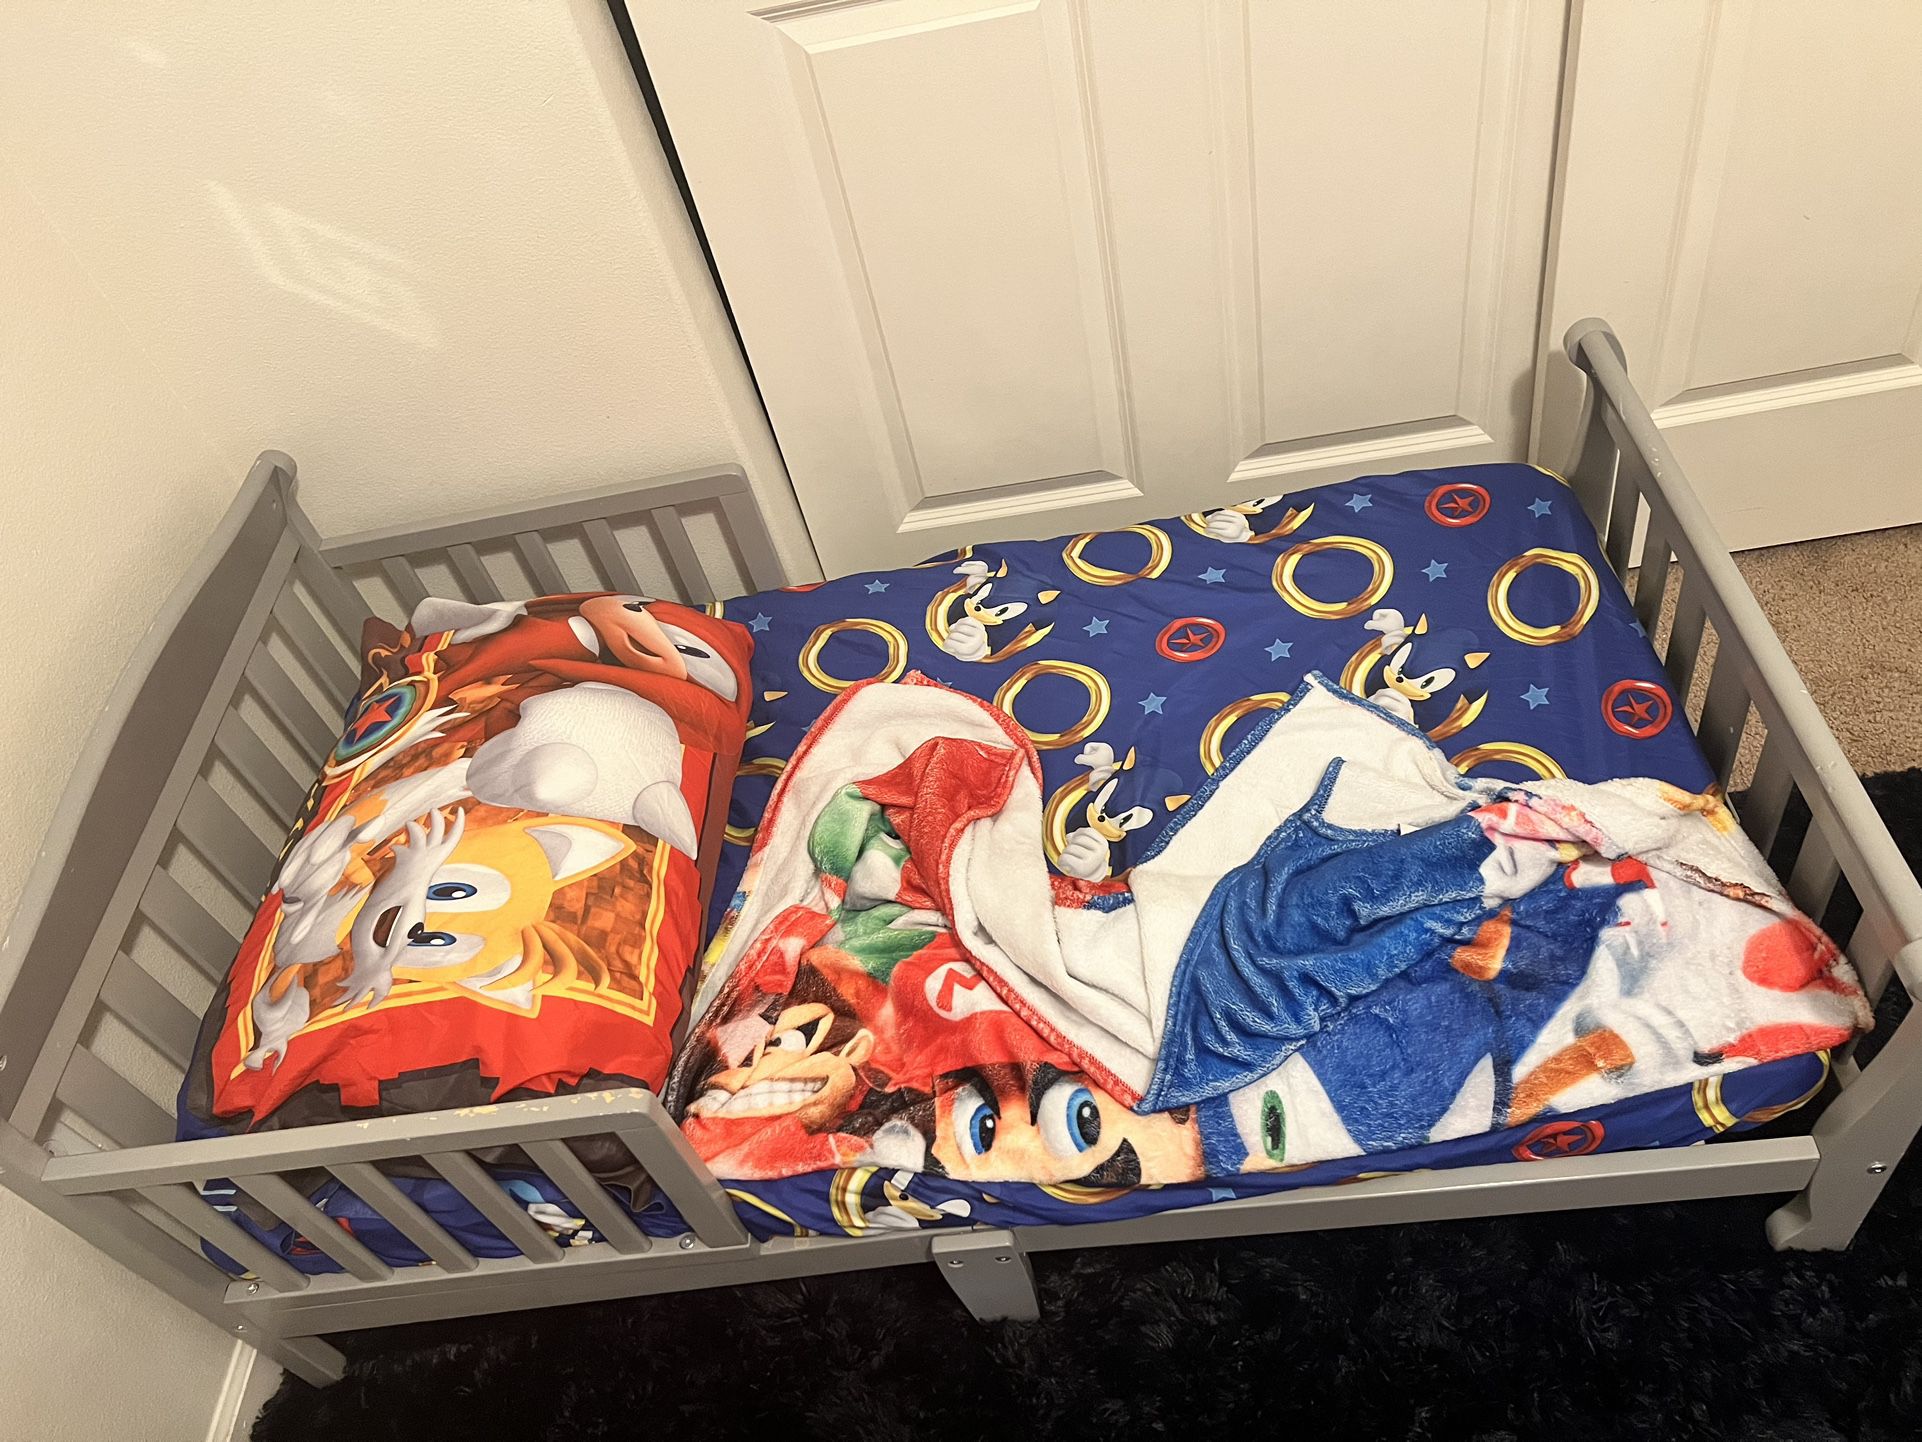 Toddler bed -good condition